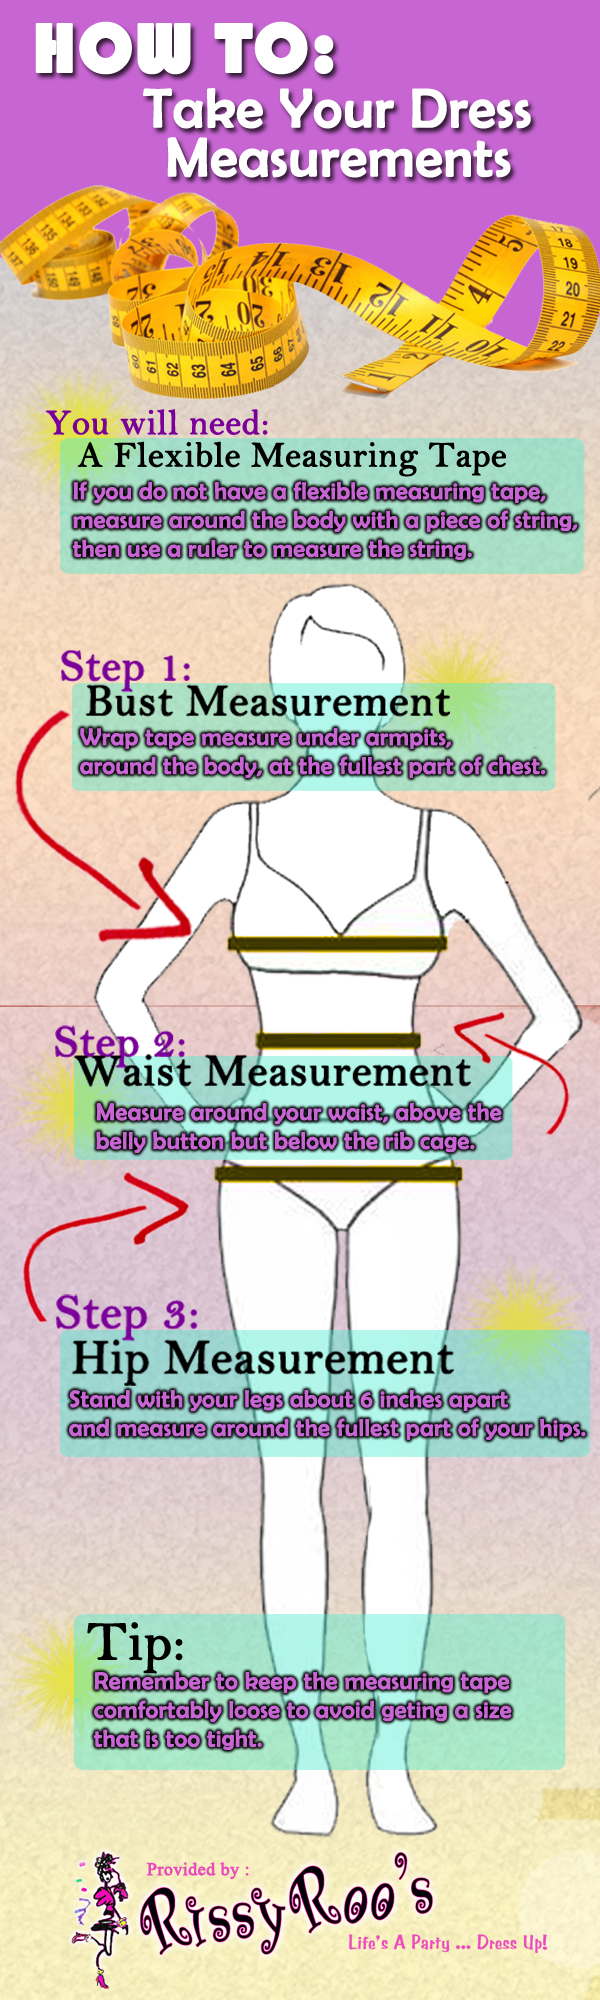 How to Take Your Dress Measurements